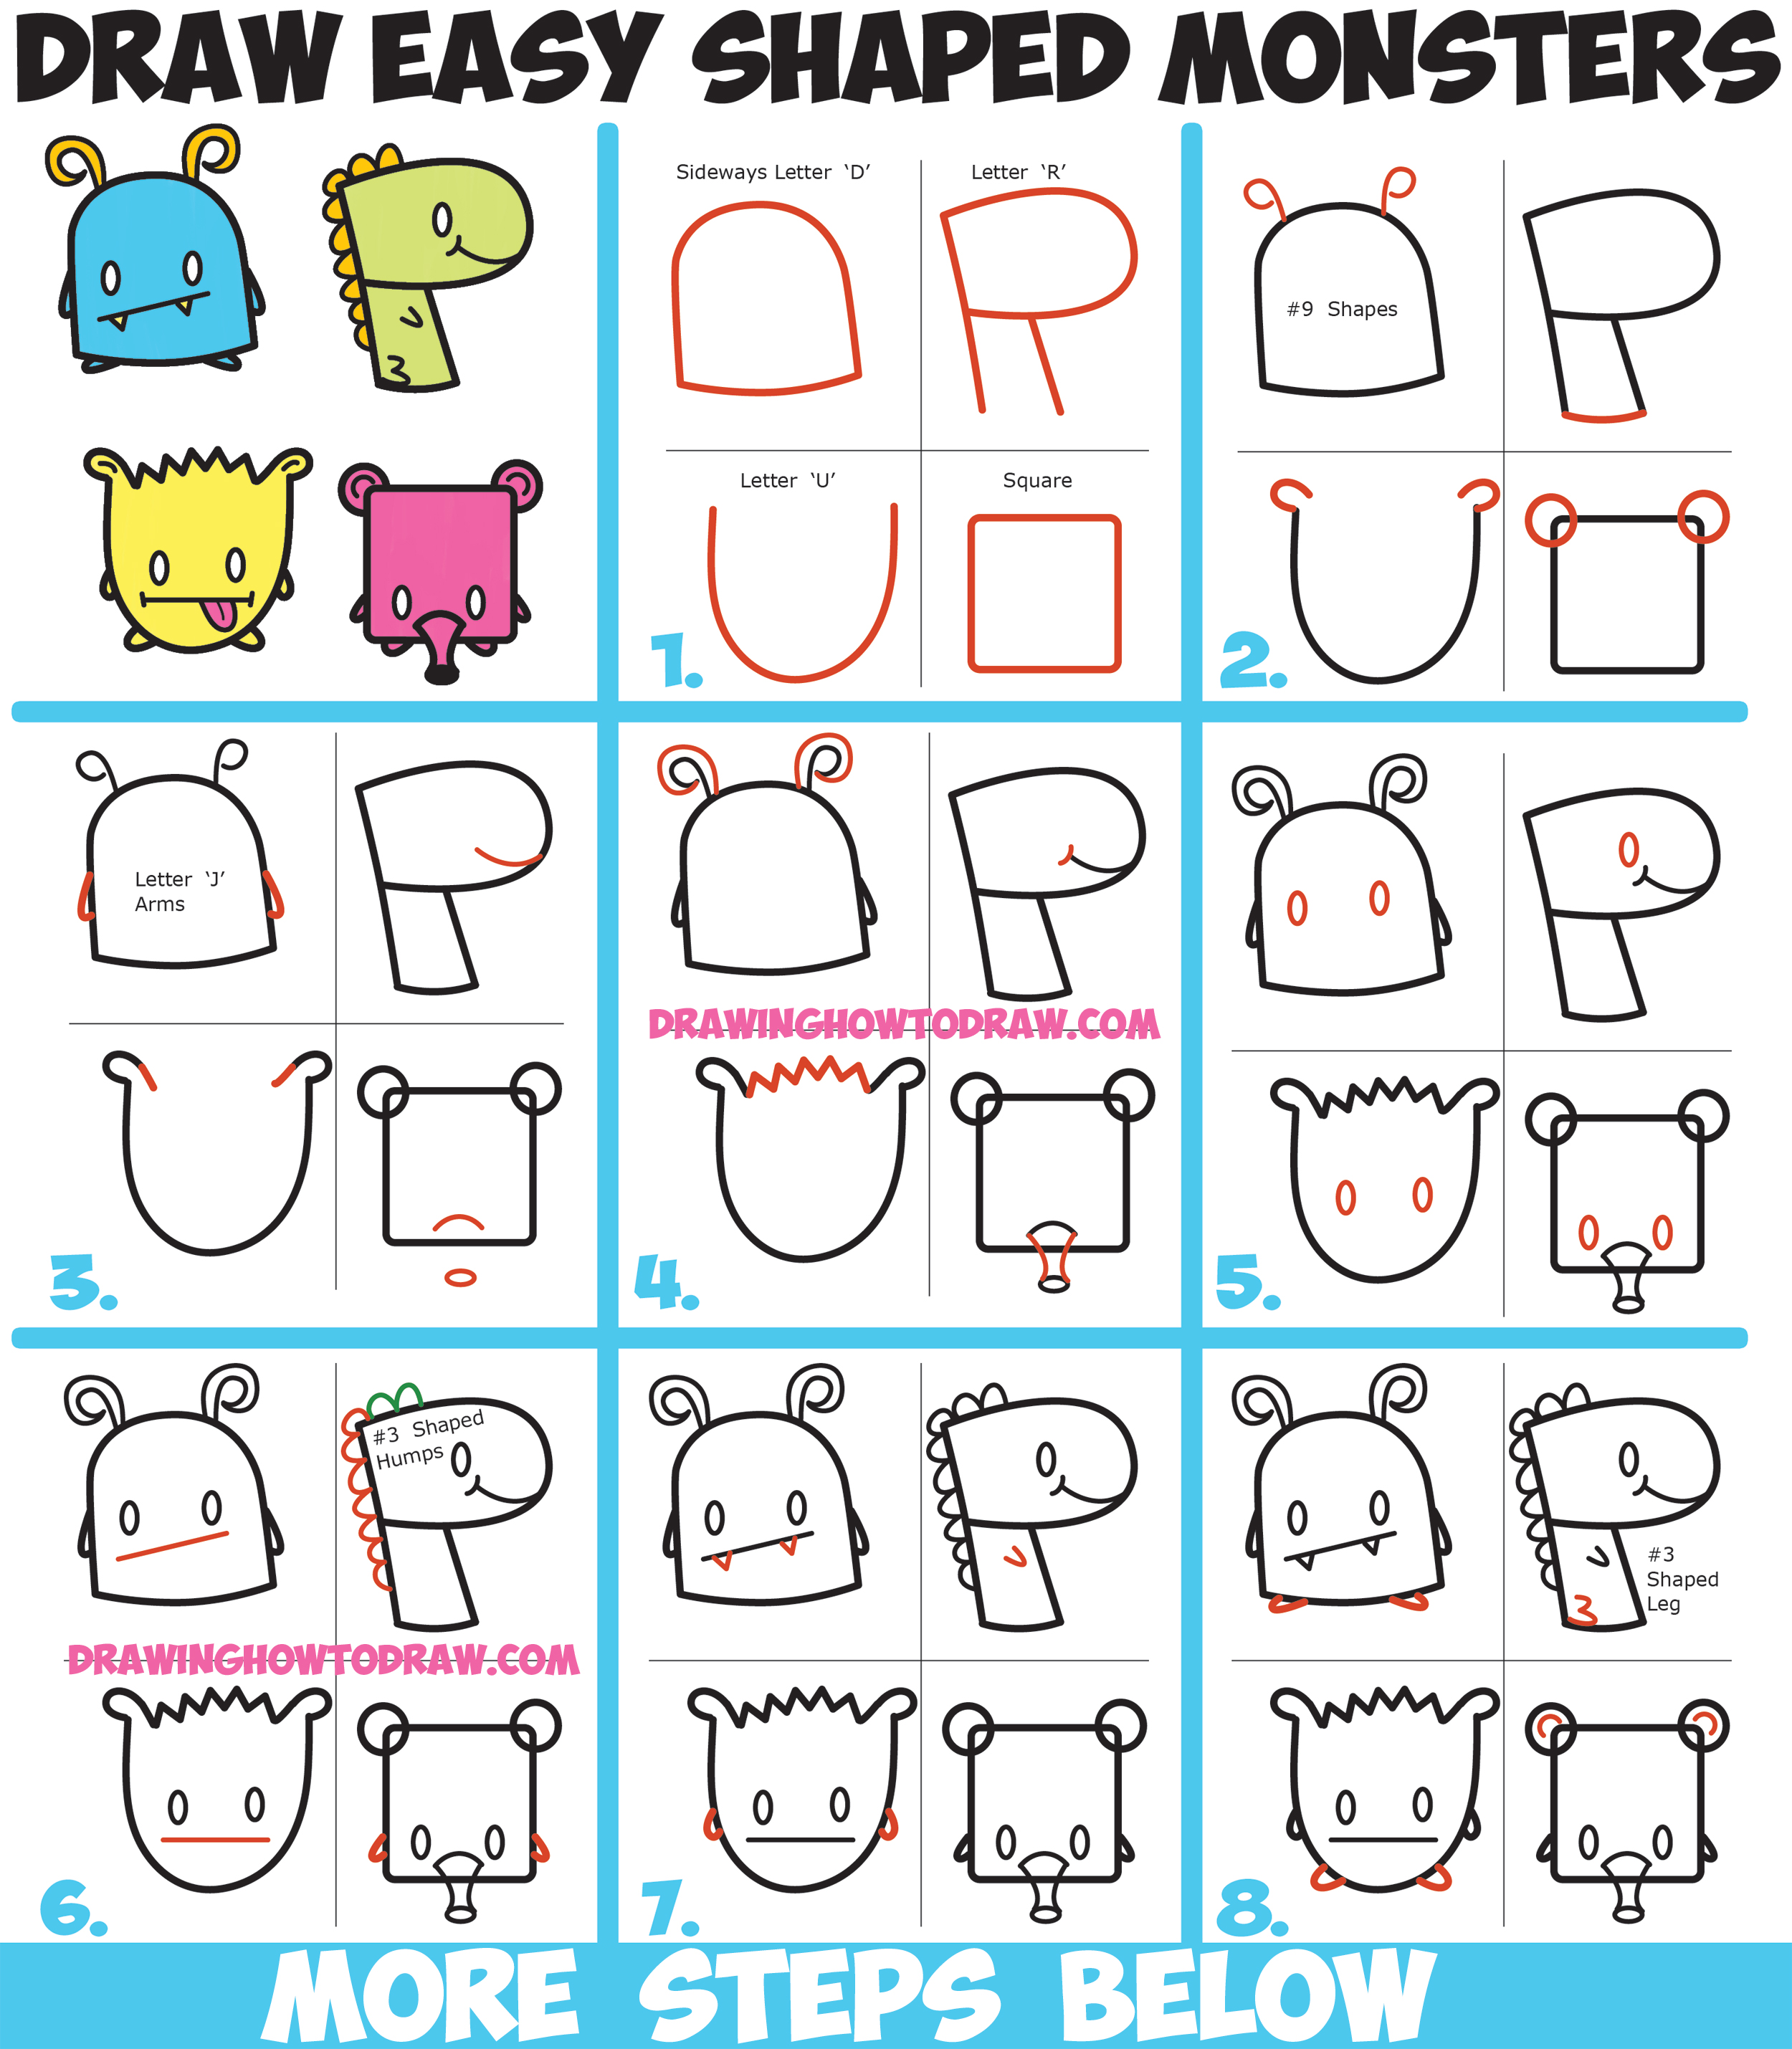 20 Easy & Cute Monster Drawing Ideas